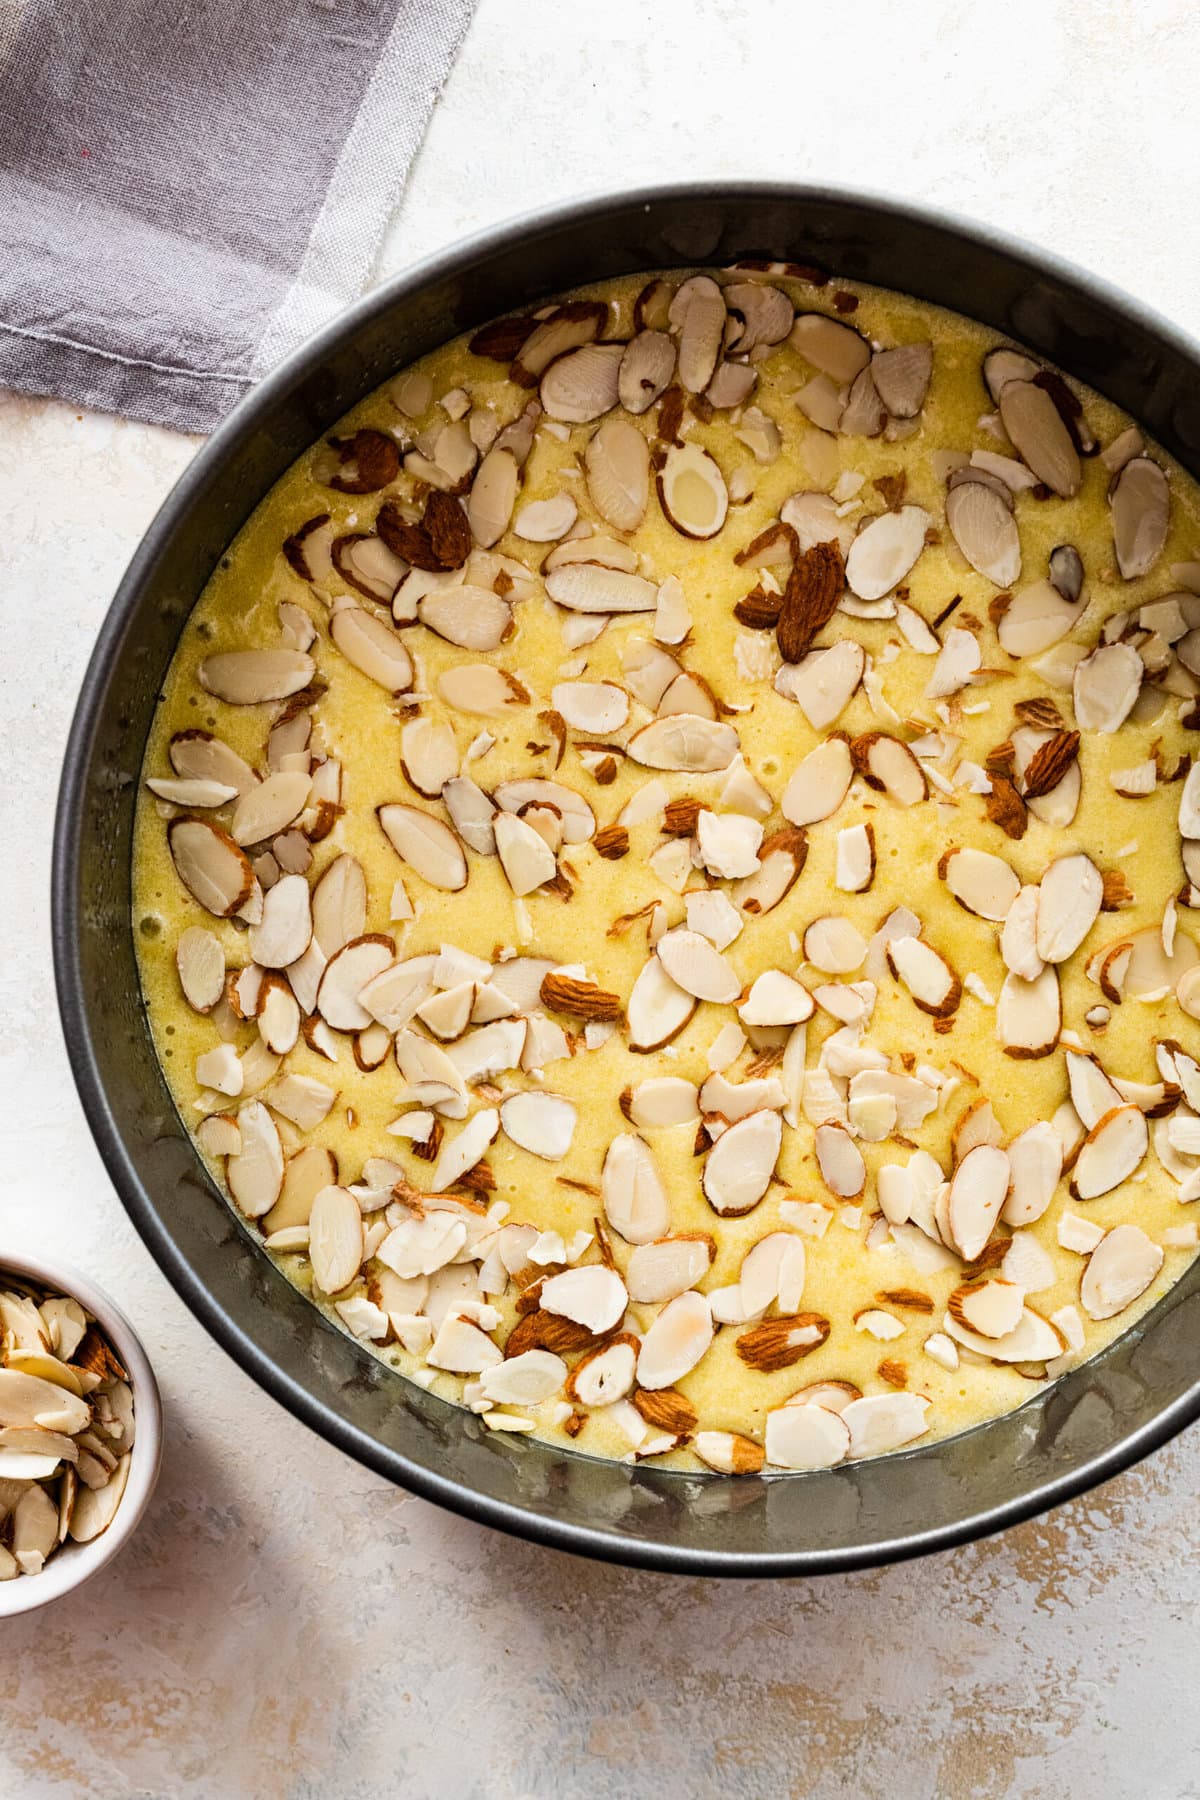 How to make easy almond cake recipe step by step: placing batter in a round metal pan and baking. Sprinkle with sliced almonds.